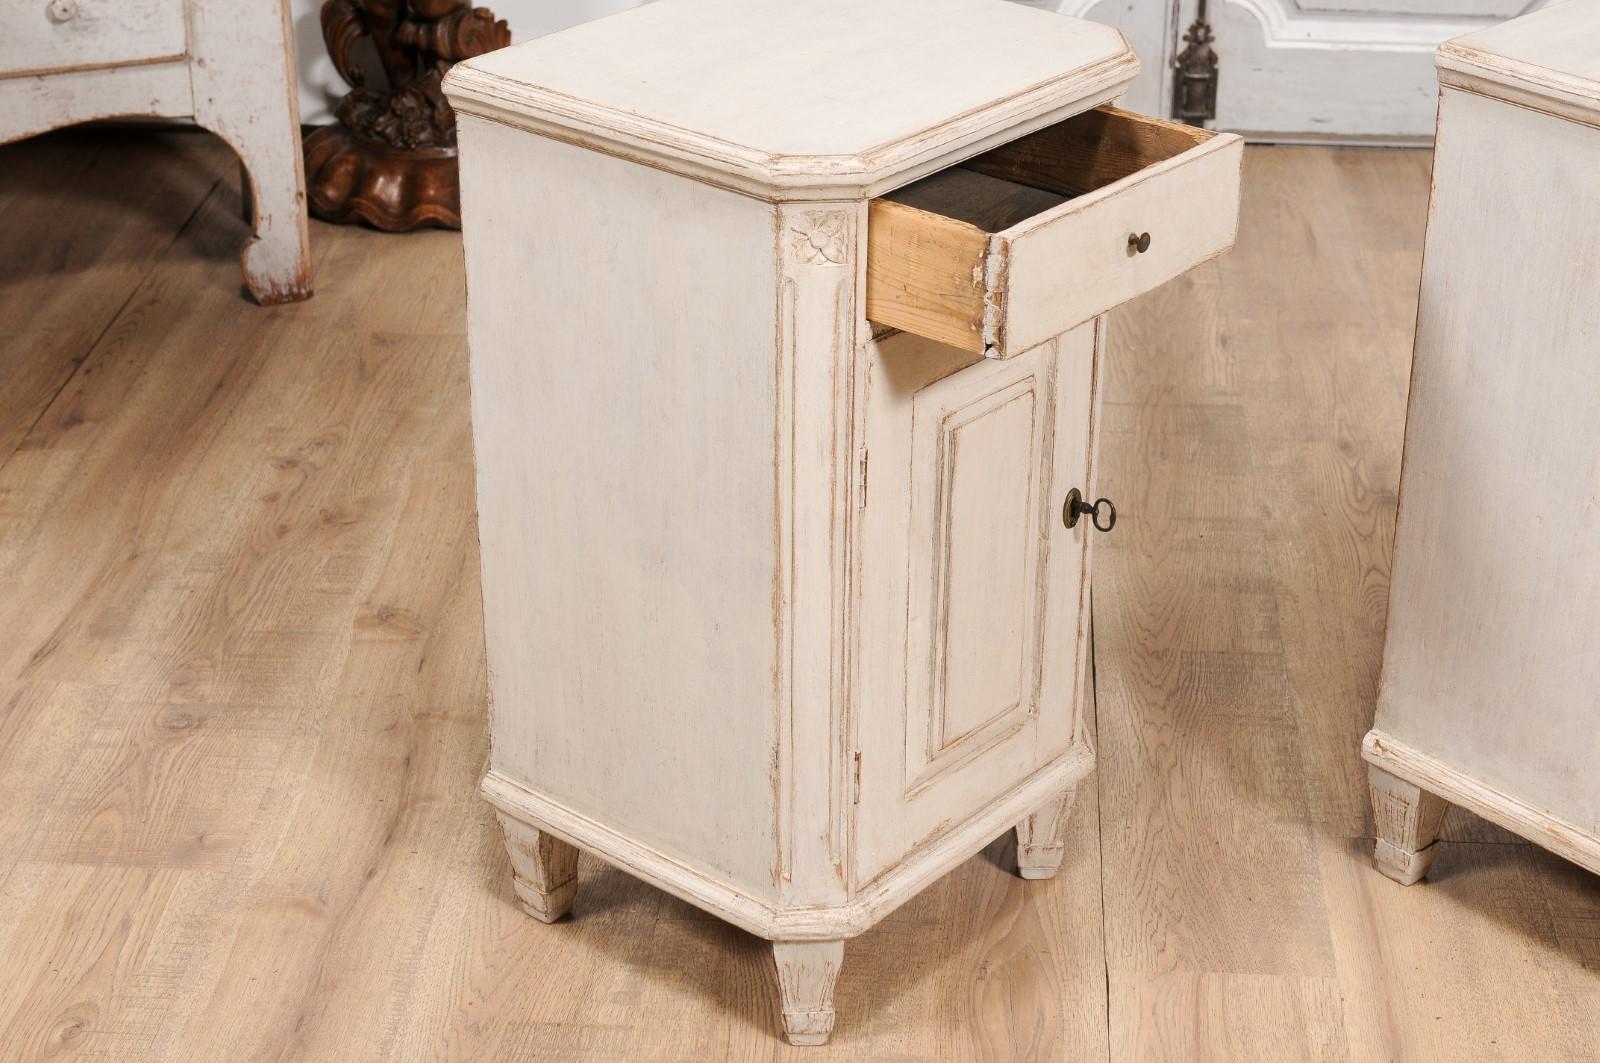 Wood Swedish Gustavian 1880s Light Gray Nightstands with Drawers and Doors, a Pair For Sale